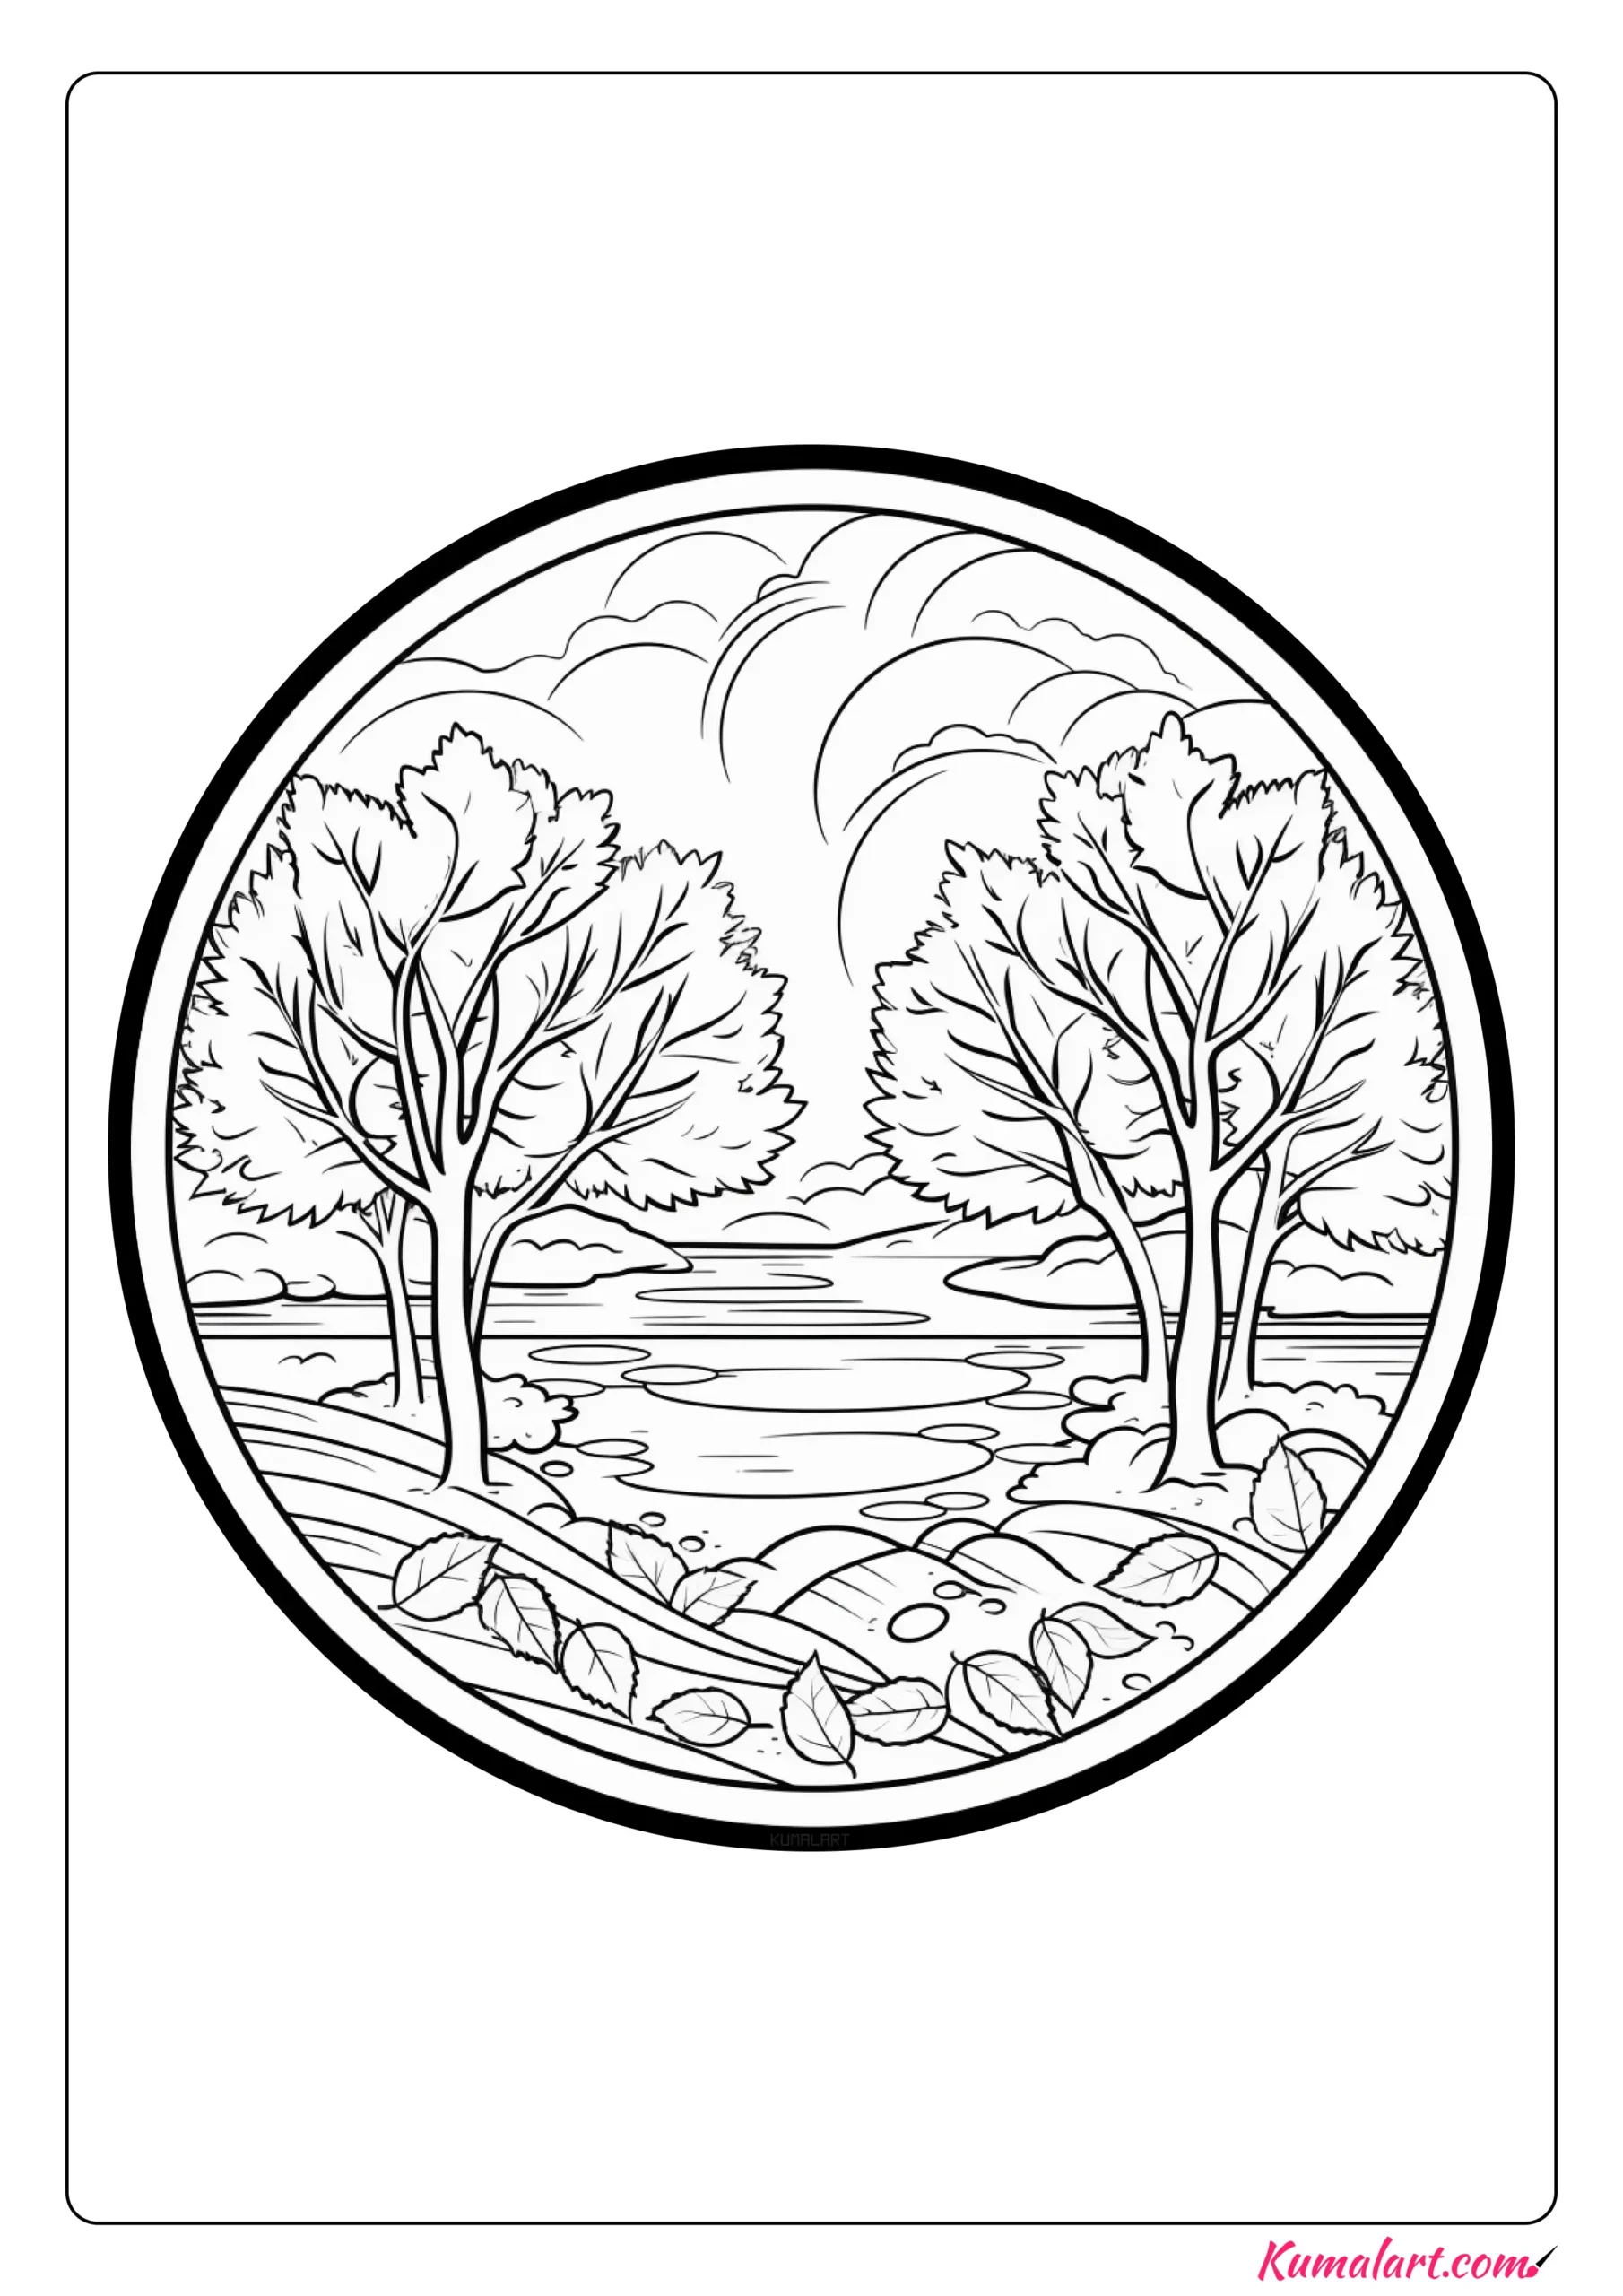 Amber Autumn Coloring Page